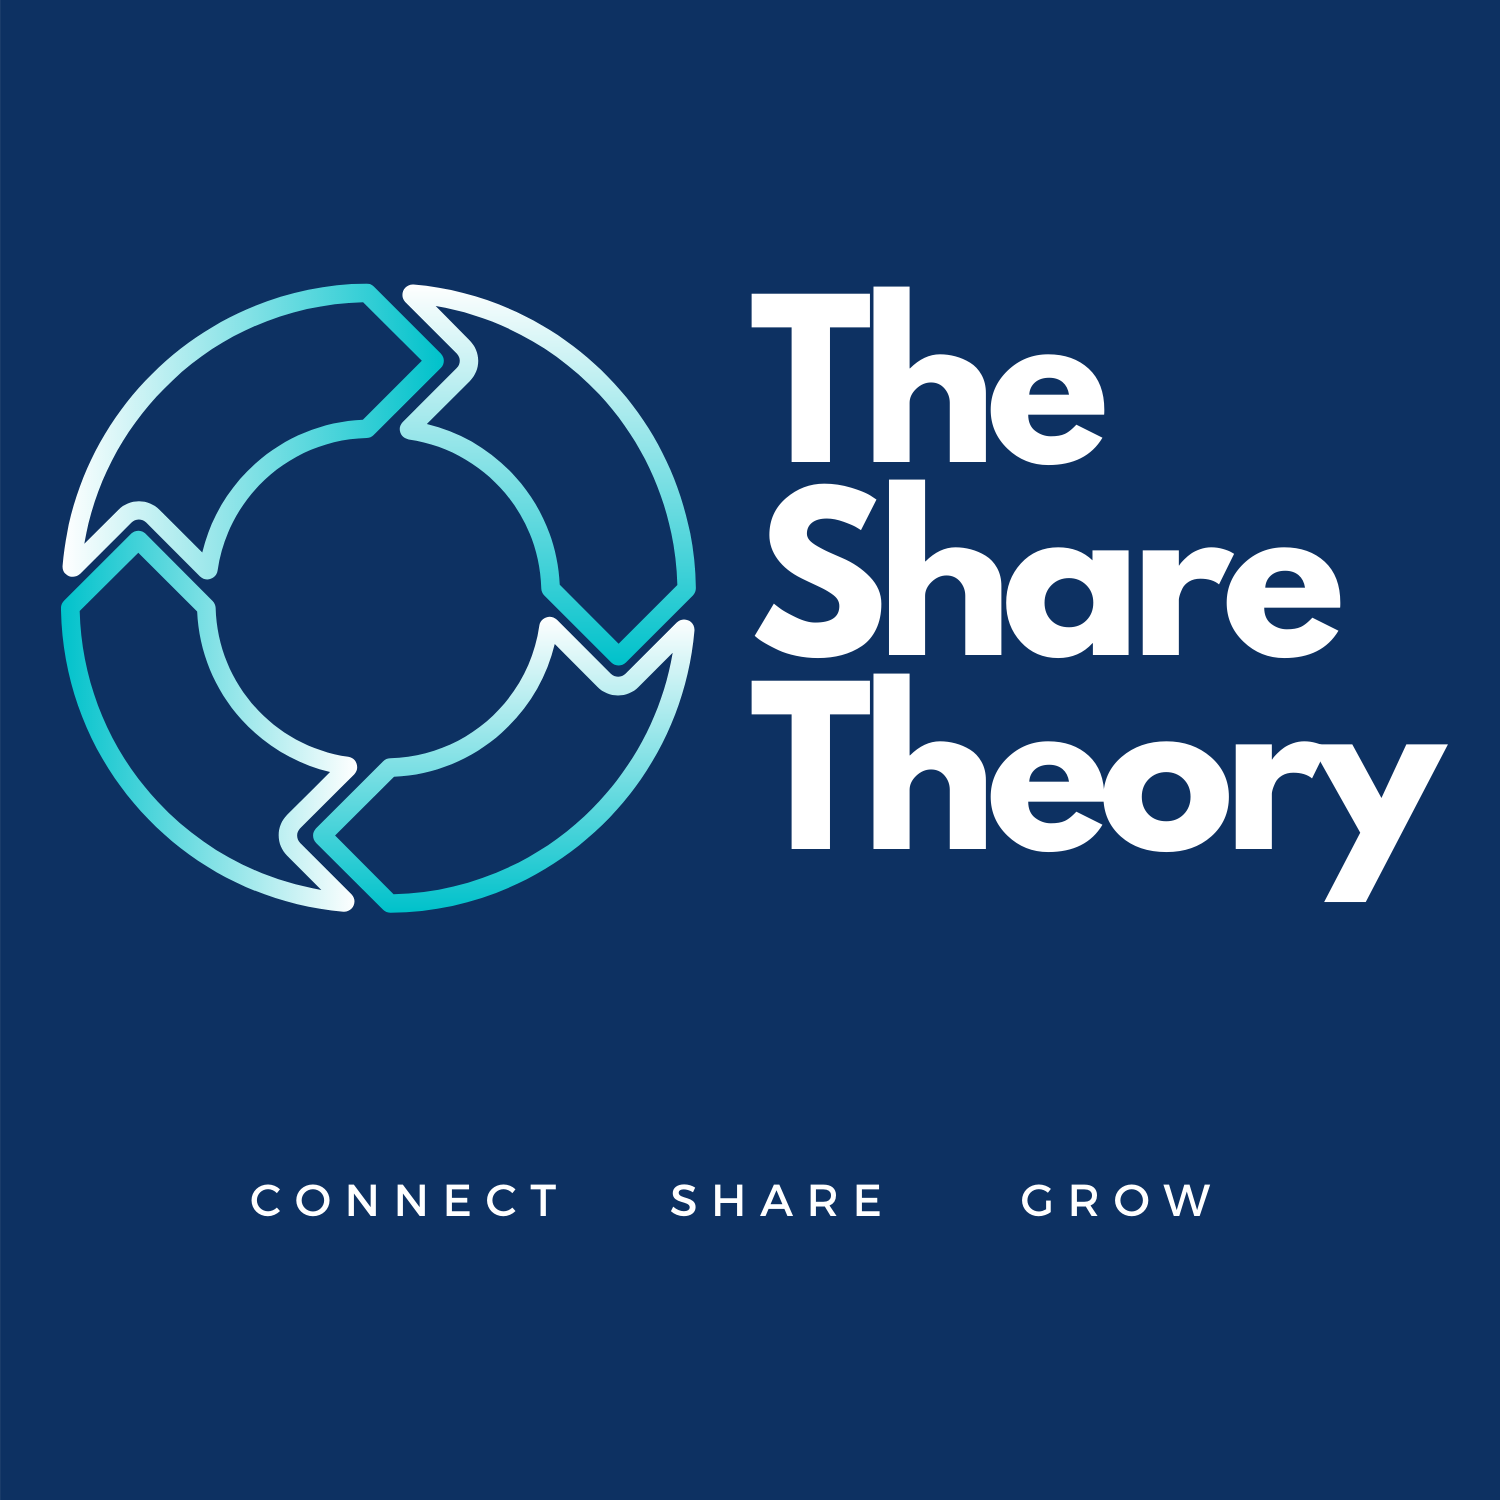 The Share Theory